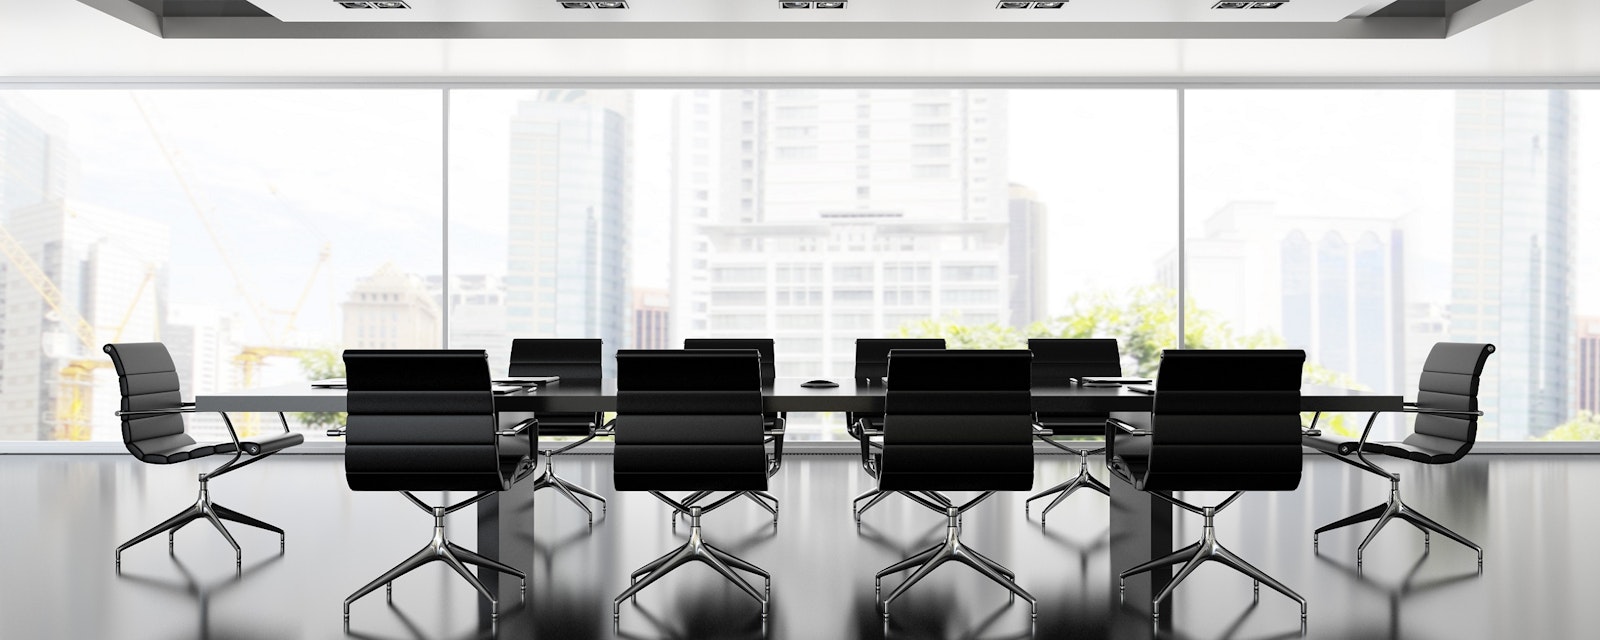 Interior,Of,Boardroom,With,Black,Armchairs,3d,Rendering